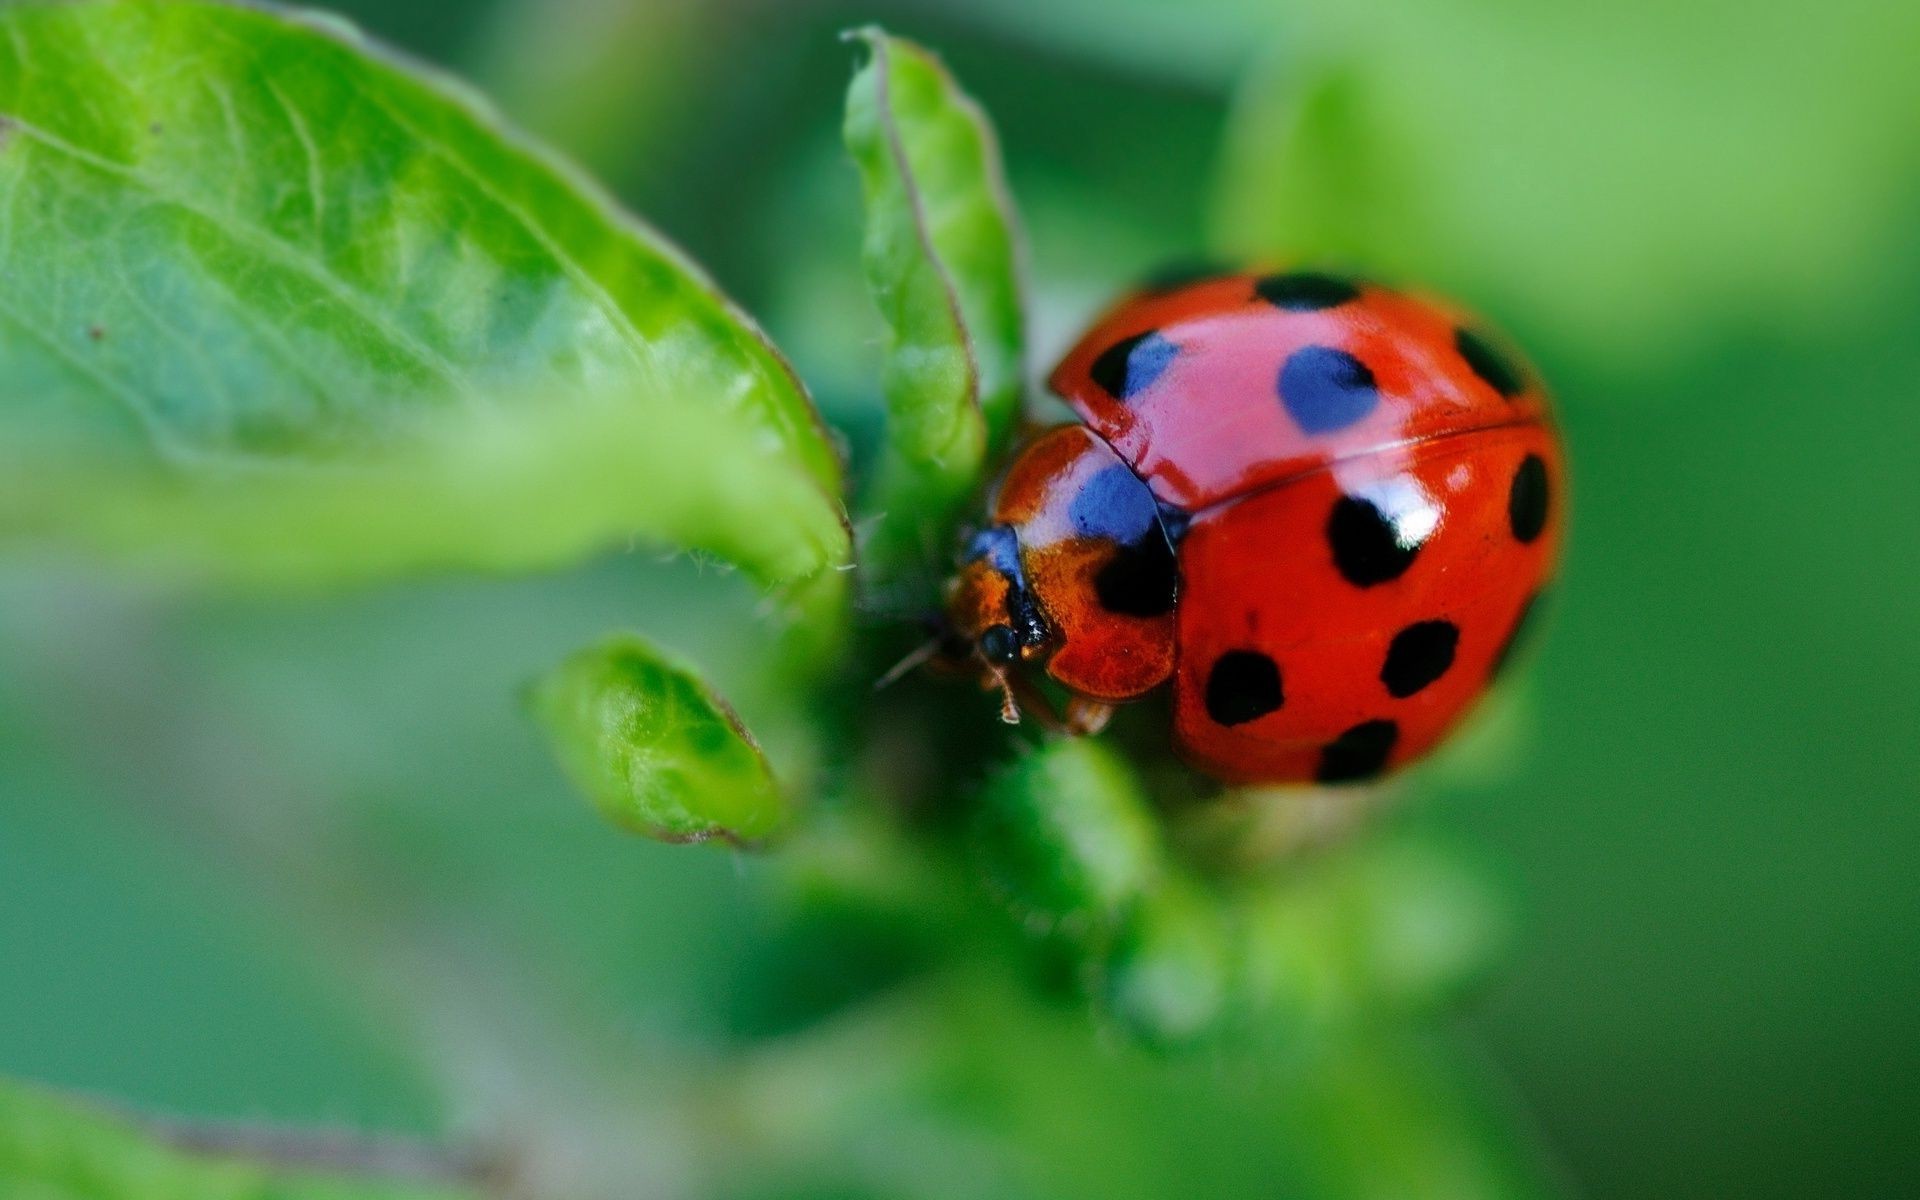 animals ladybug nature insect leaf beetle summer biology little grass flora outdoors garden tiny growth